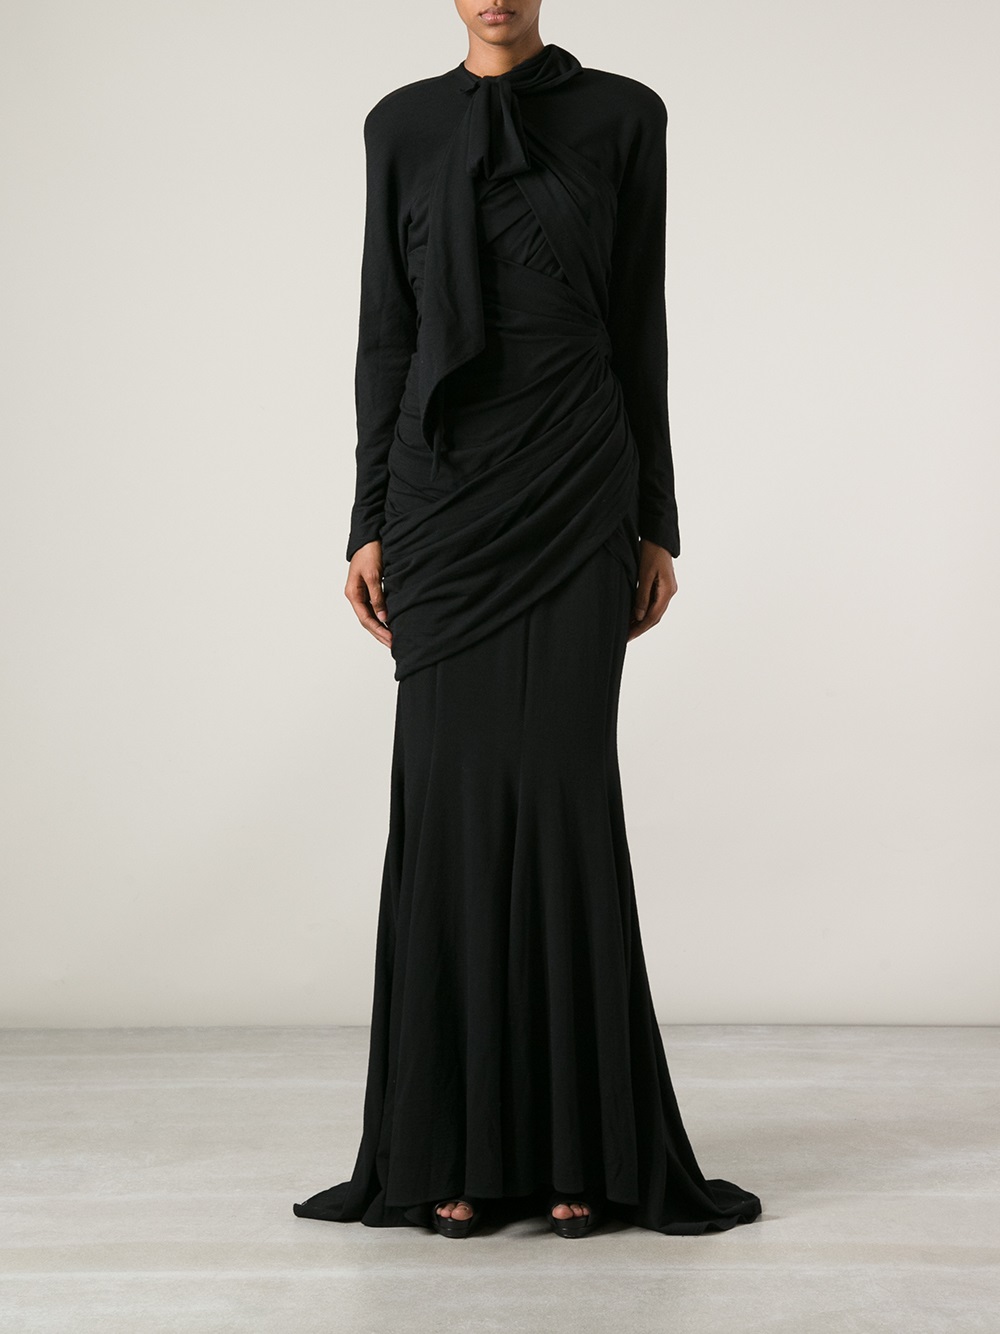 Lyst - Thierry Mugler Evening Gown in Black